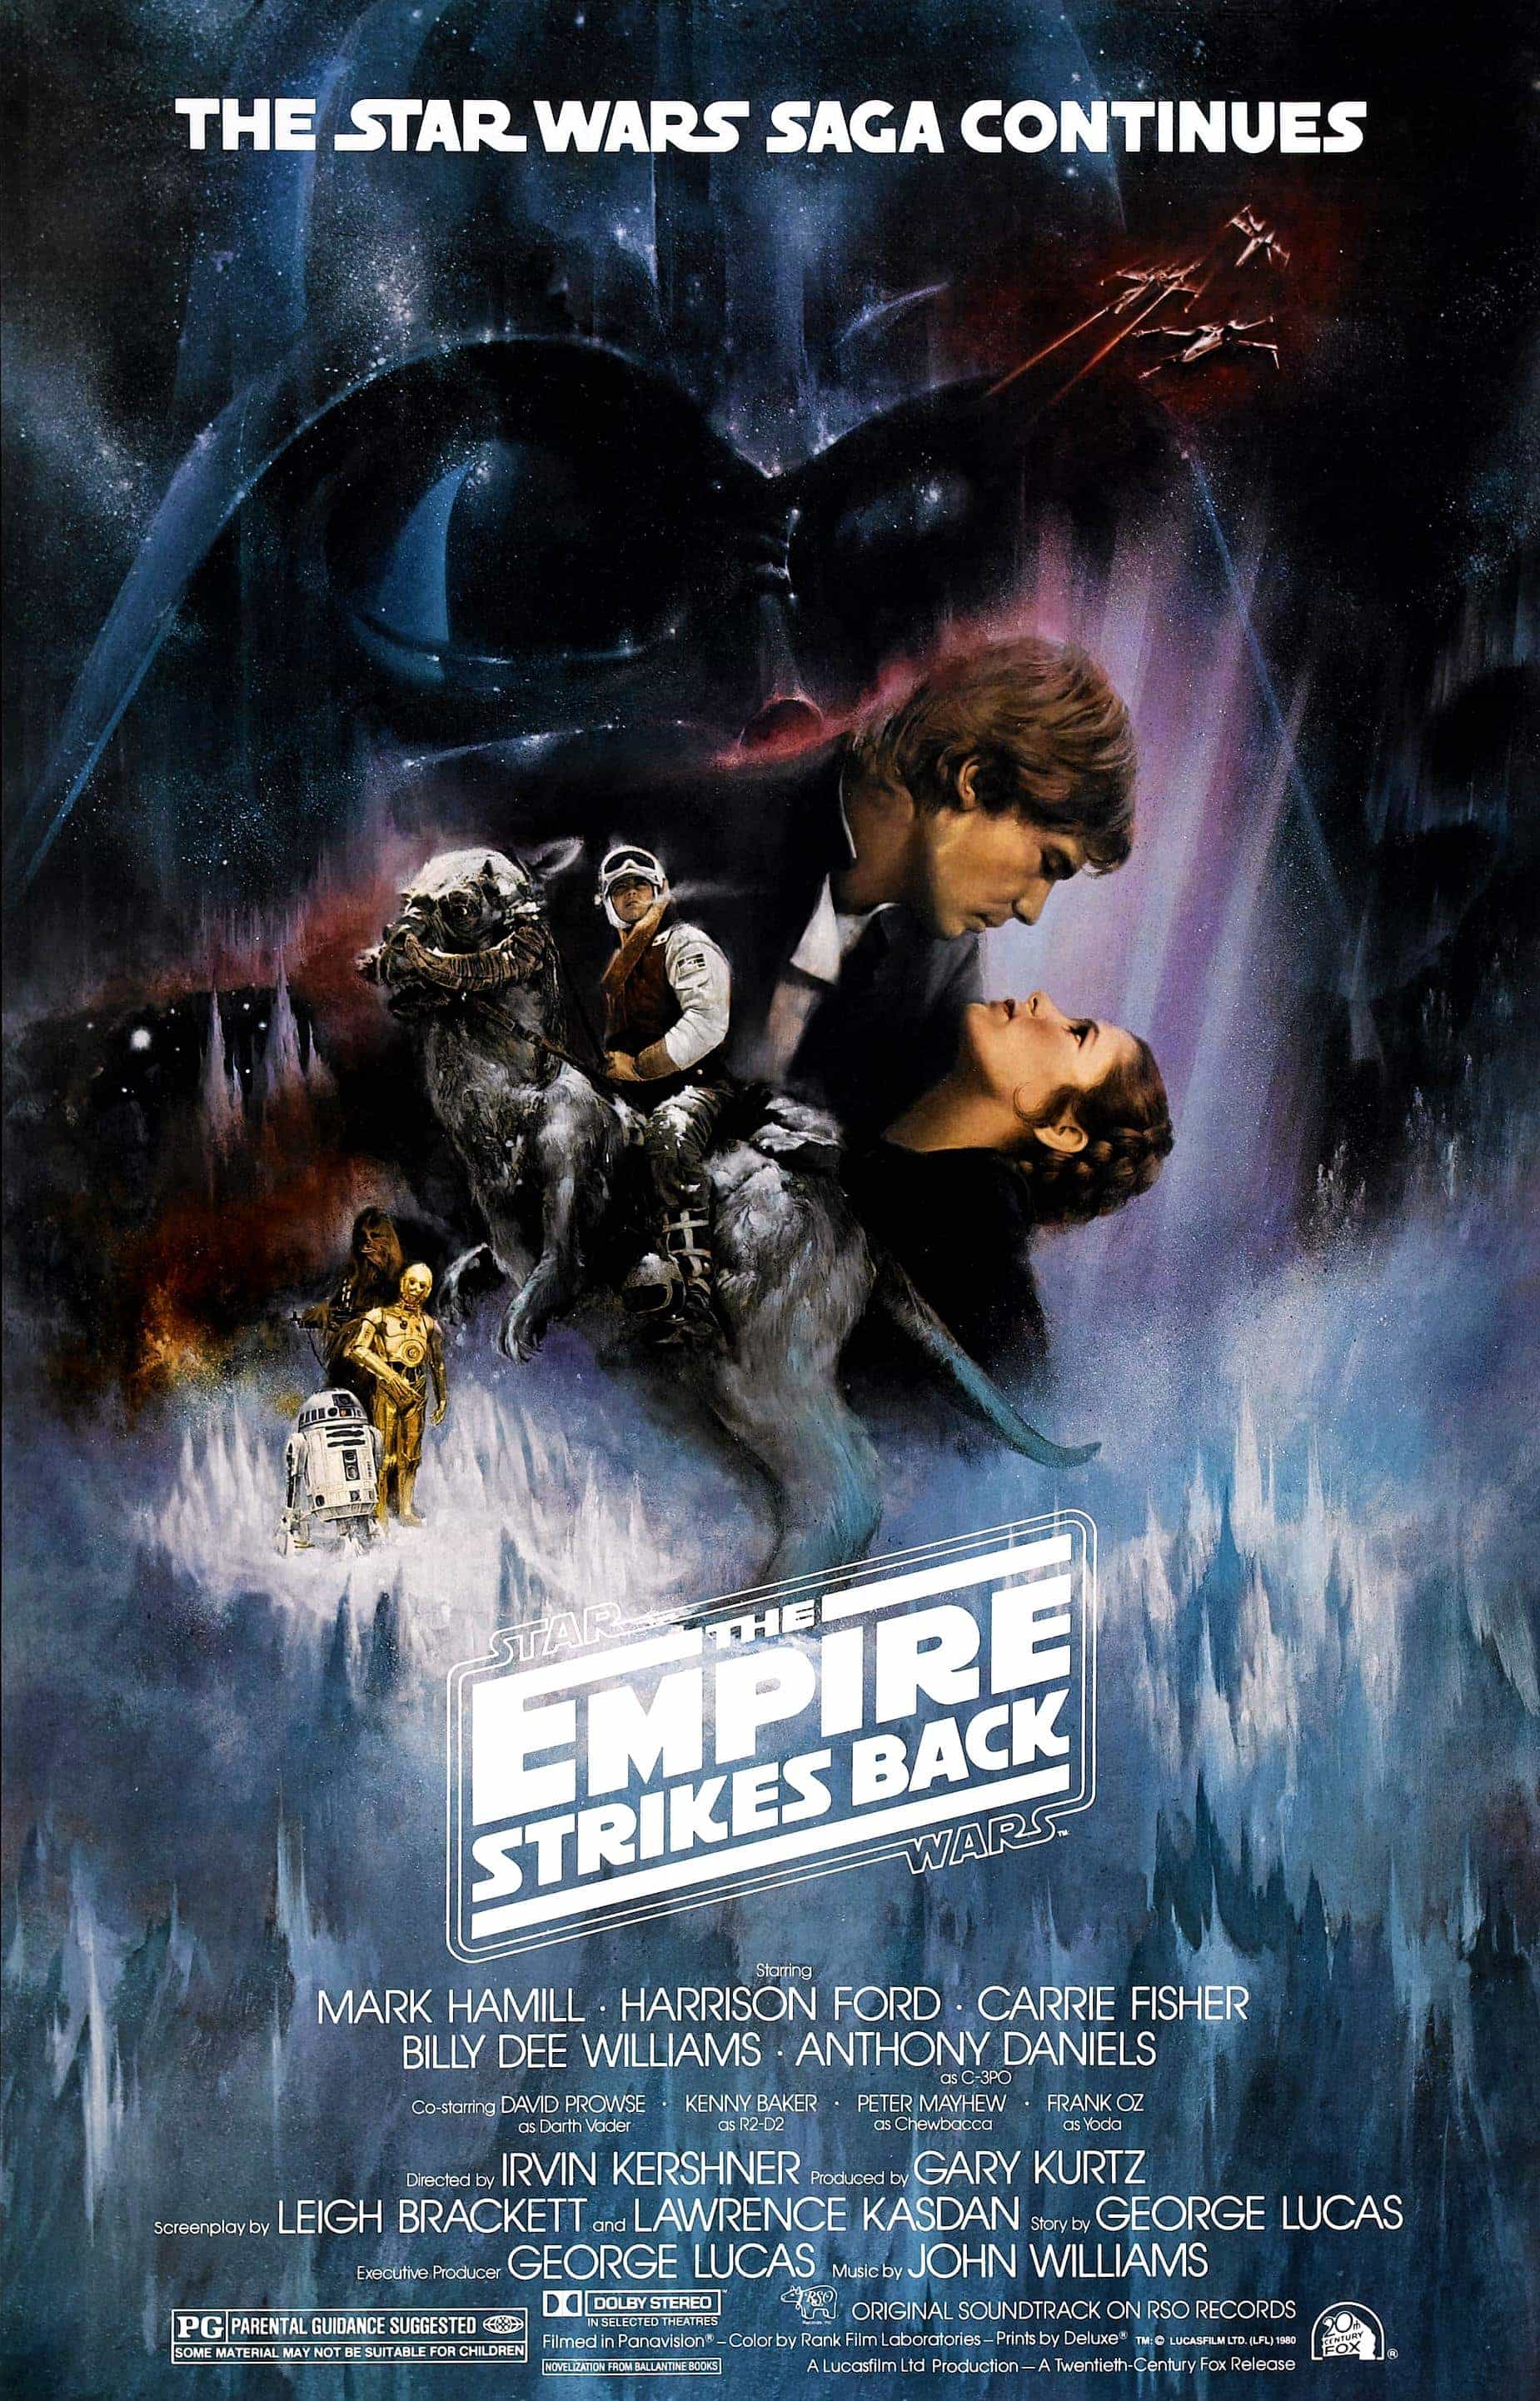 US Box Office Weekend Report 10th - 12th July 2020:  40th anniversary re-release of The Empire Strikes Back is the top movie of the week in a still quiet American box office